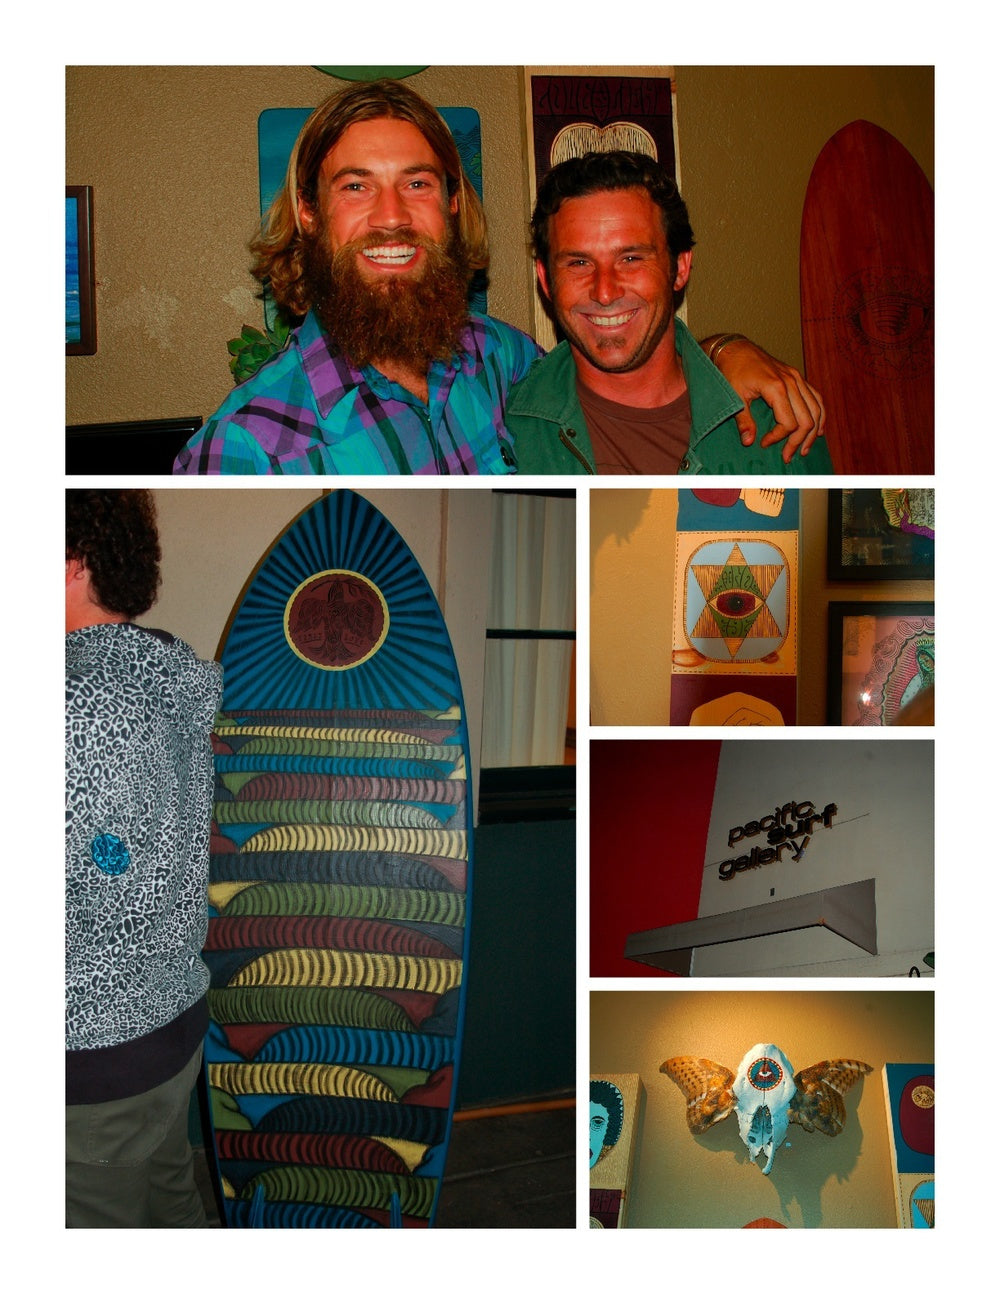 Chris Del Moro Hosts One Awesome Art Show